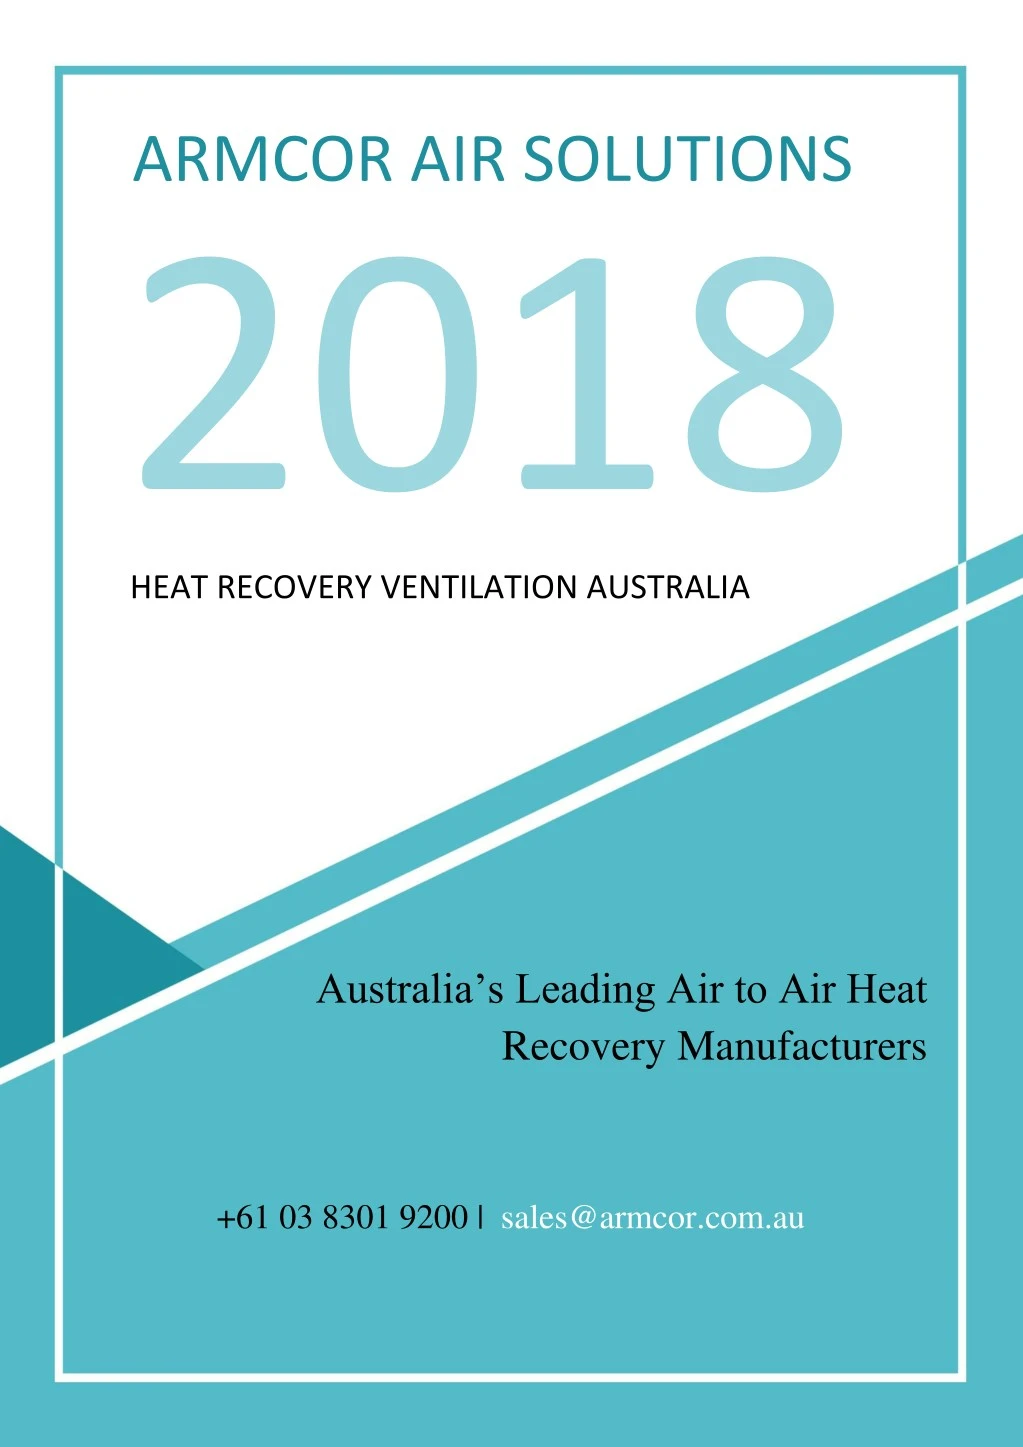 armcor air solutions 2018 heat recovery